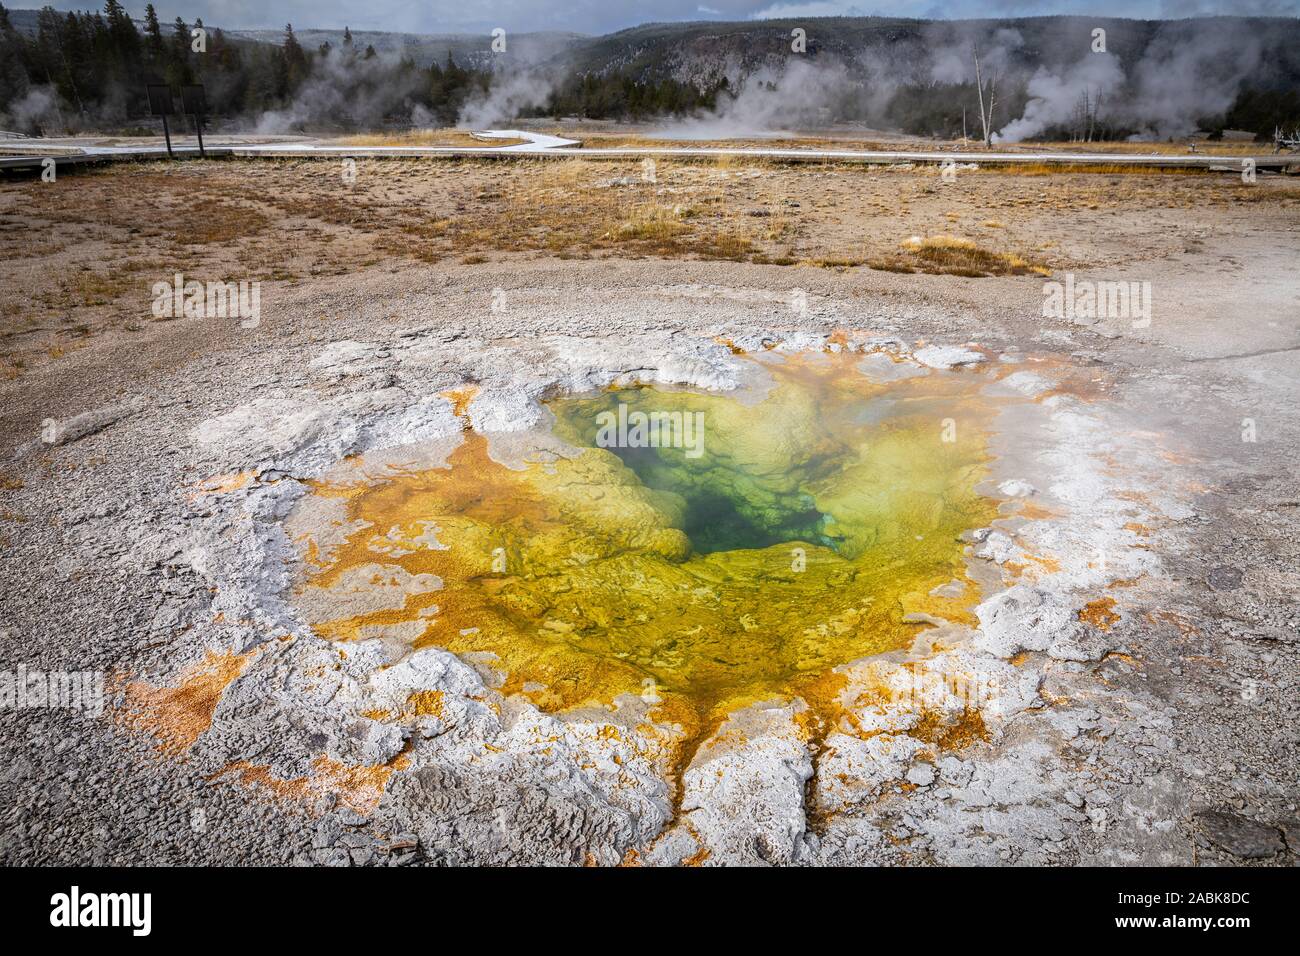 Green and yellow geyser basin with boiling water from geothermal heat, Yellostone National Park, Wyoming, USA. Colors of basin depending on temperatur Stock Photo